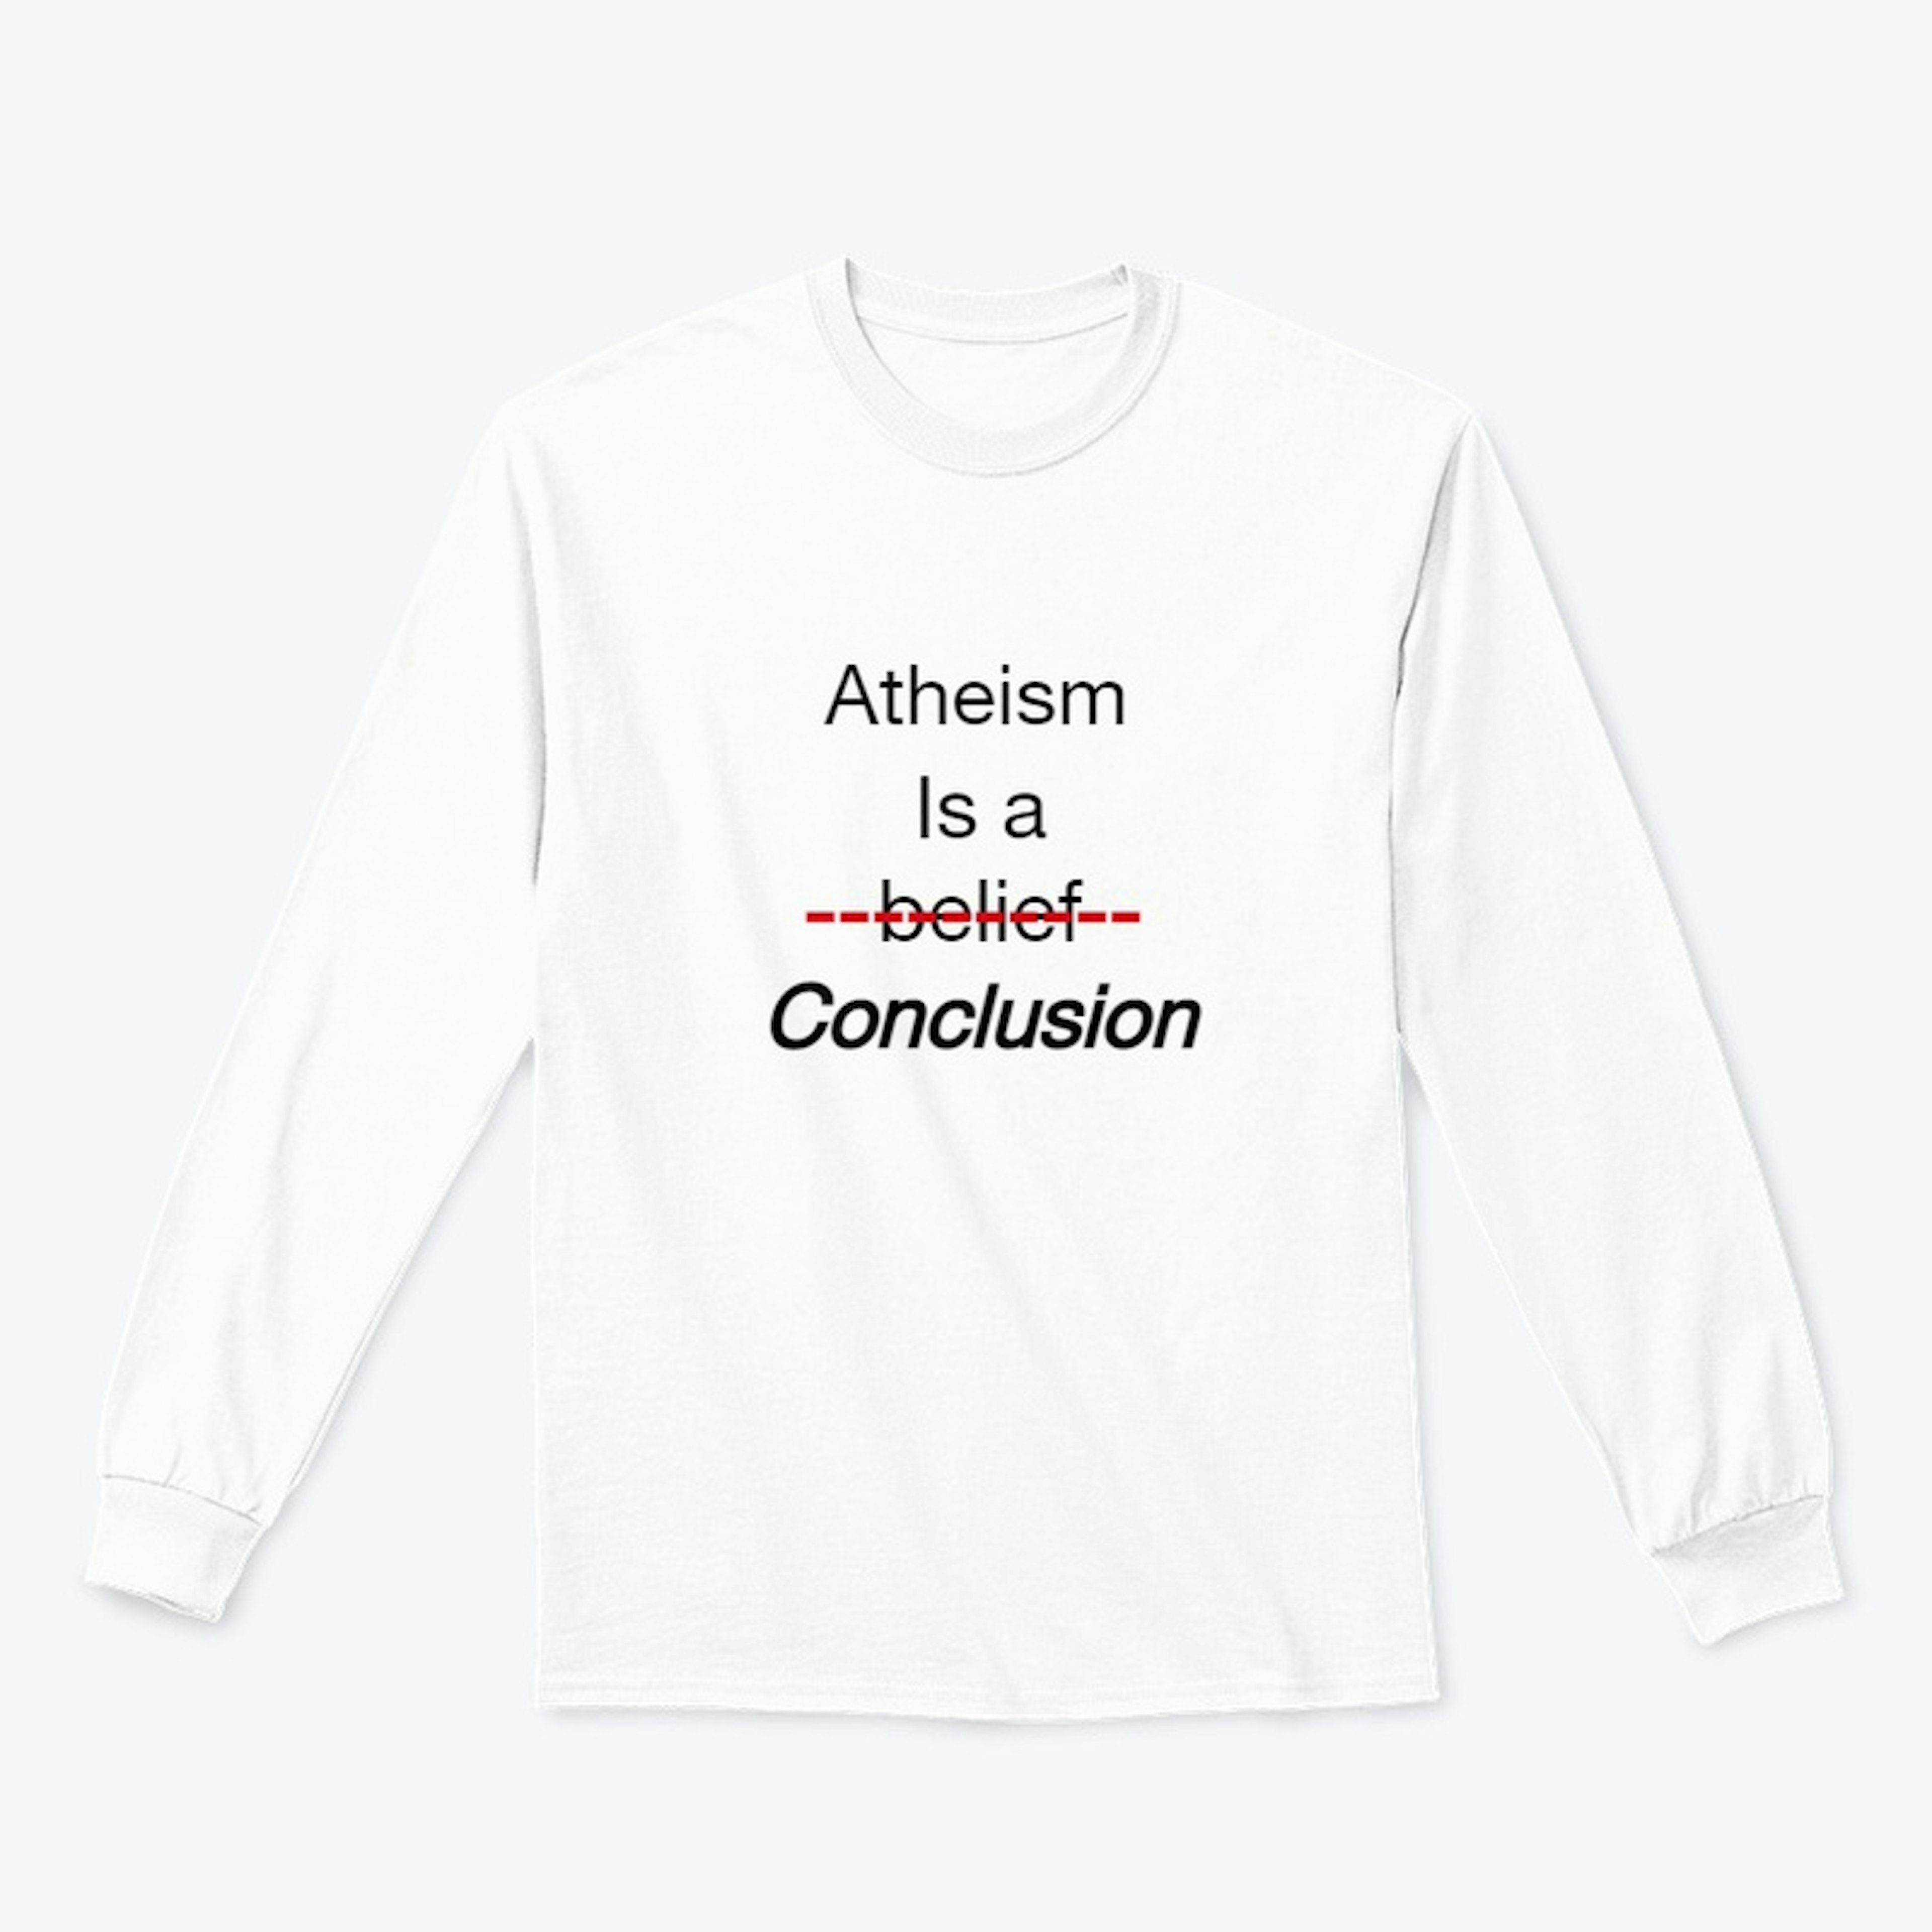 Atheism is a conclusion